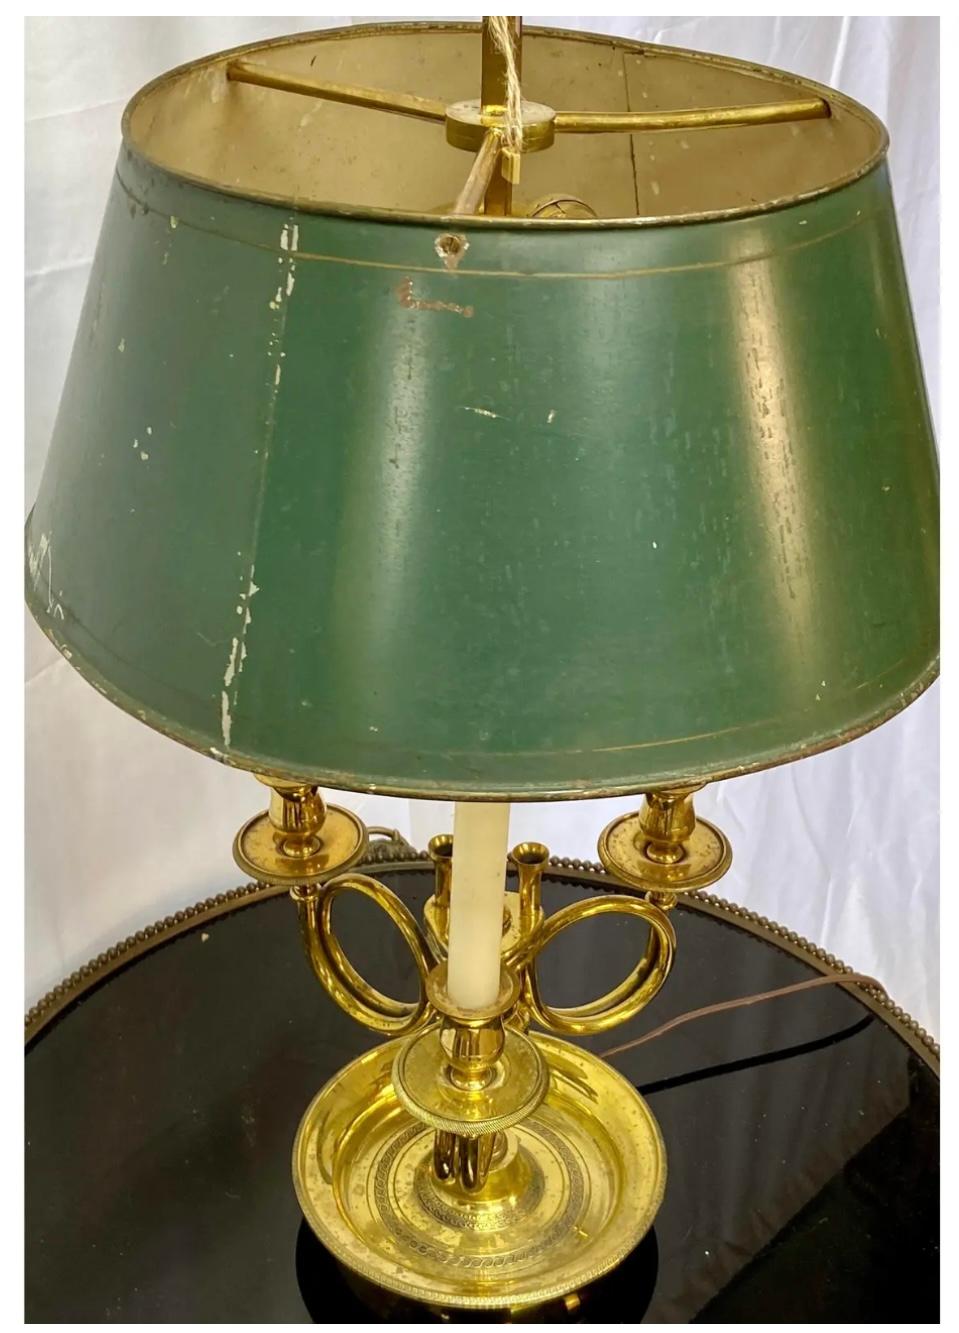 French bronze Bouillotte lamp with green and gold metal shade. Lamp has two light sockets as well as three candle holders. Some age appropriate wear and patina.